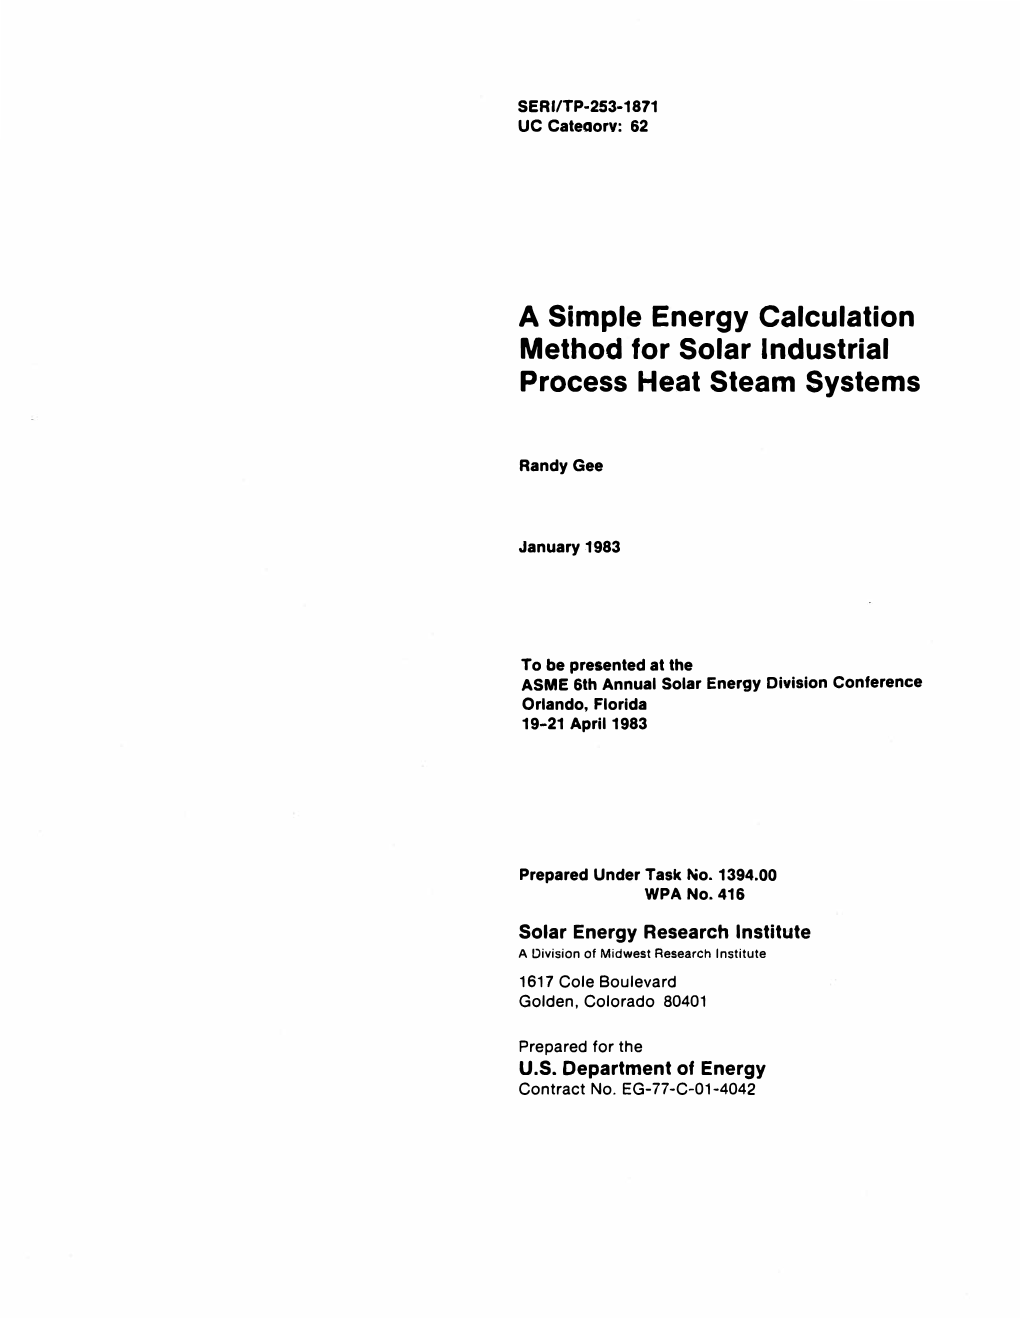 A Simple Energy Calculation Method for Solar Industrial Process Heat Steam Systems